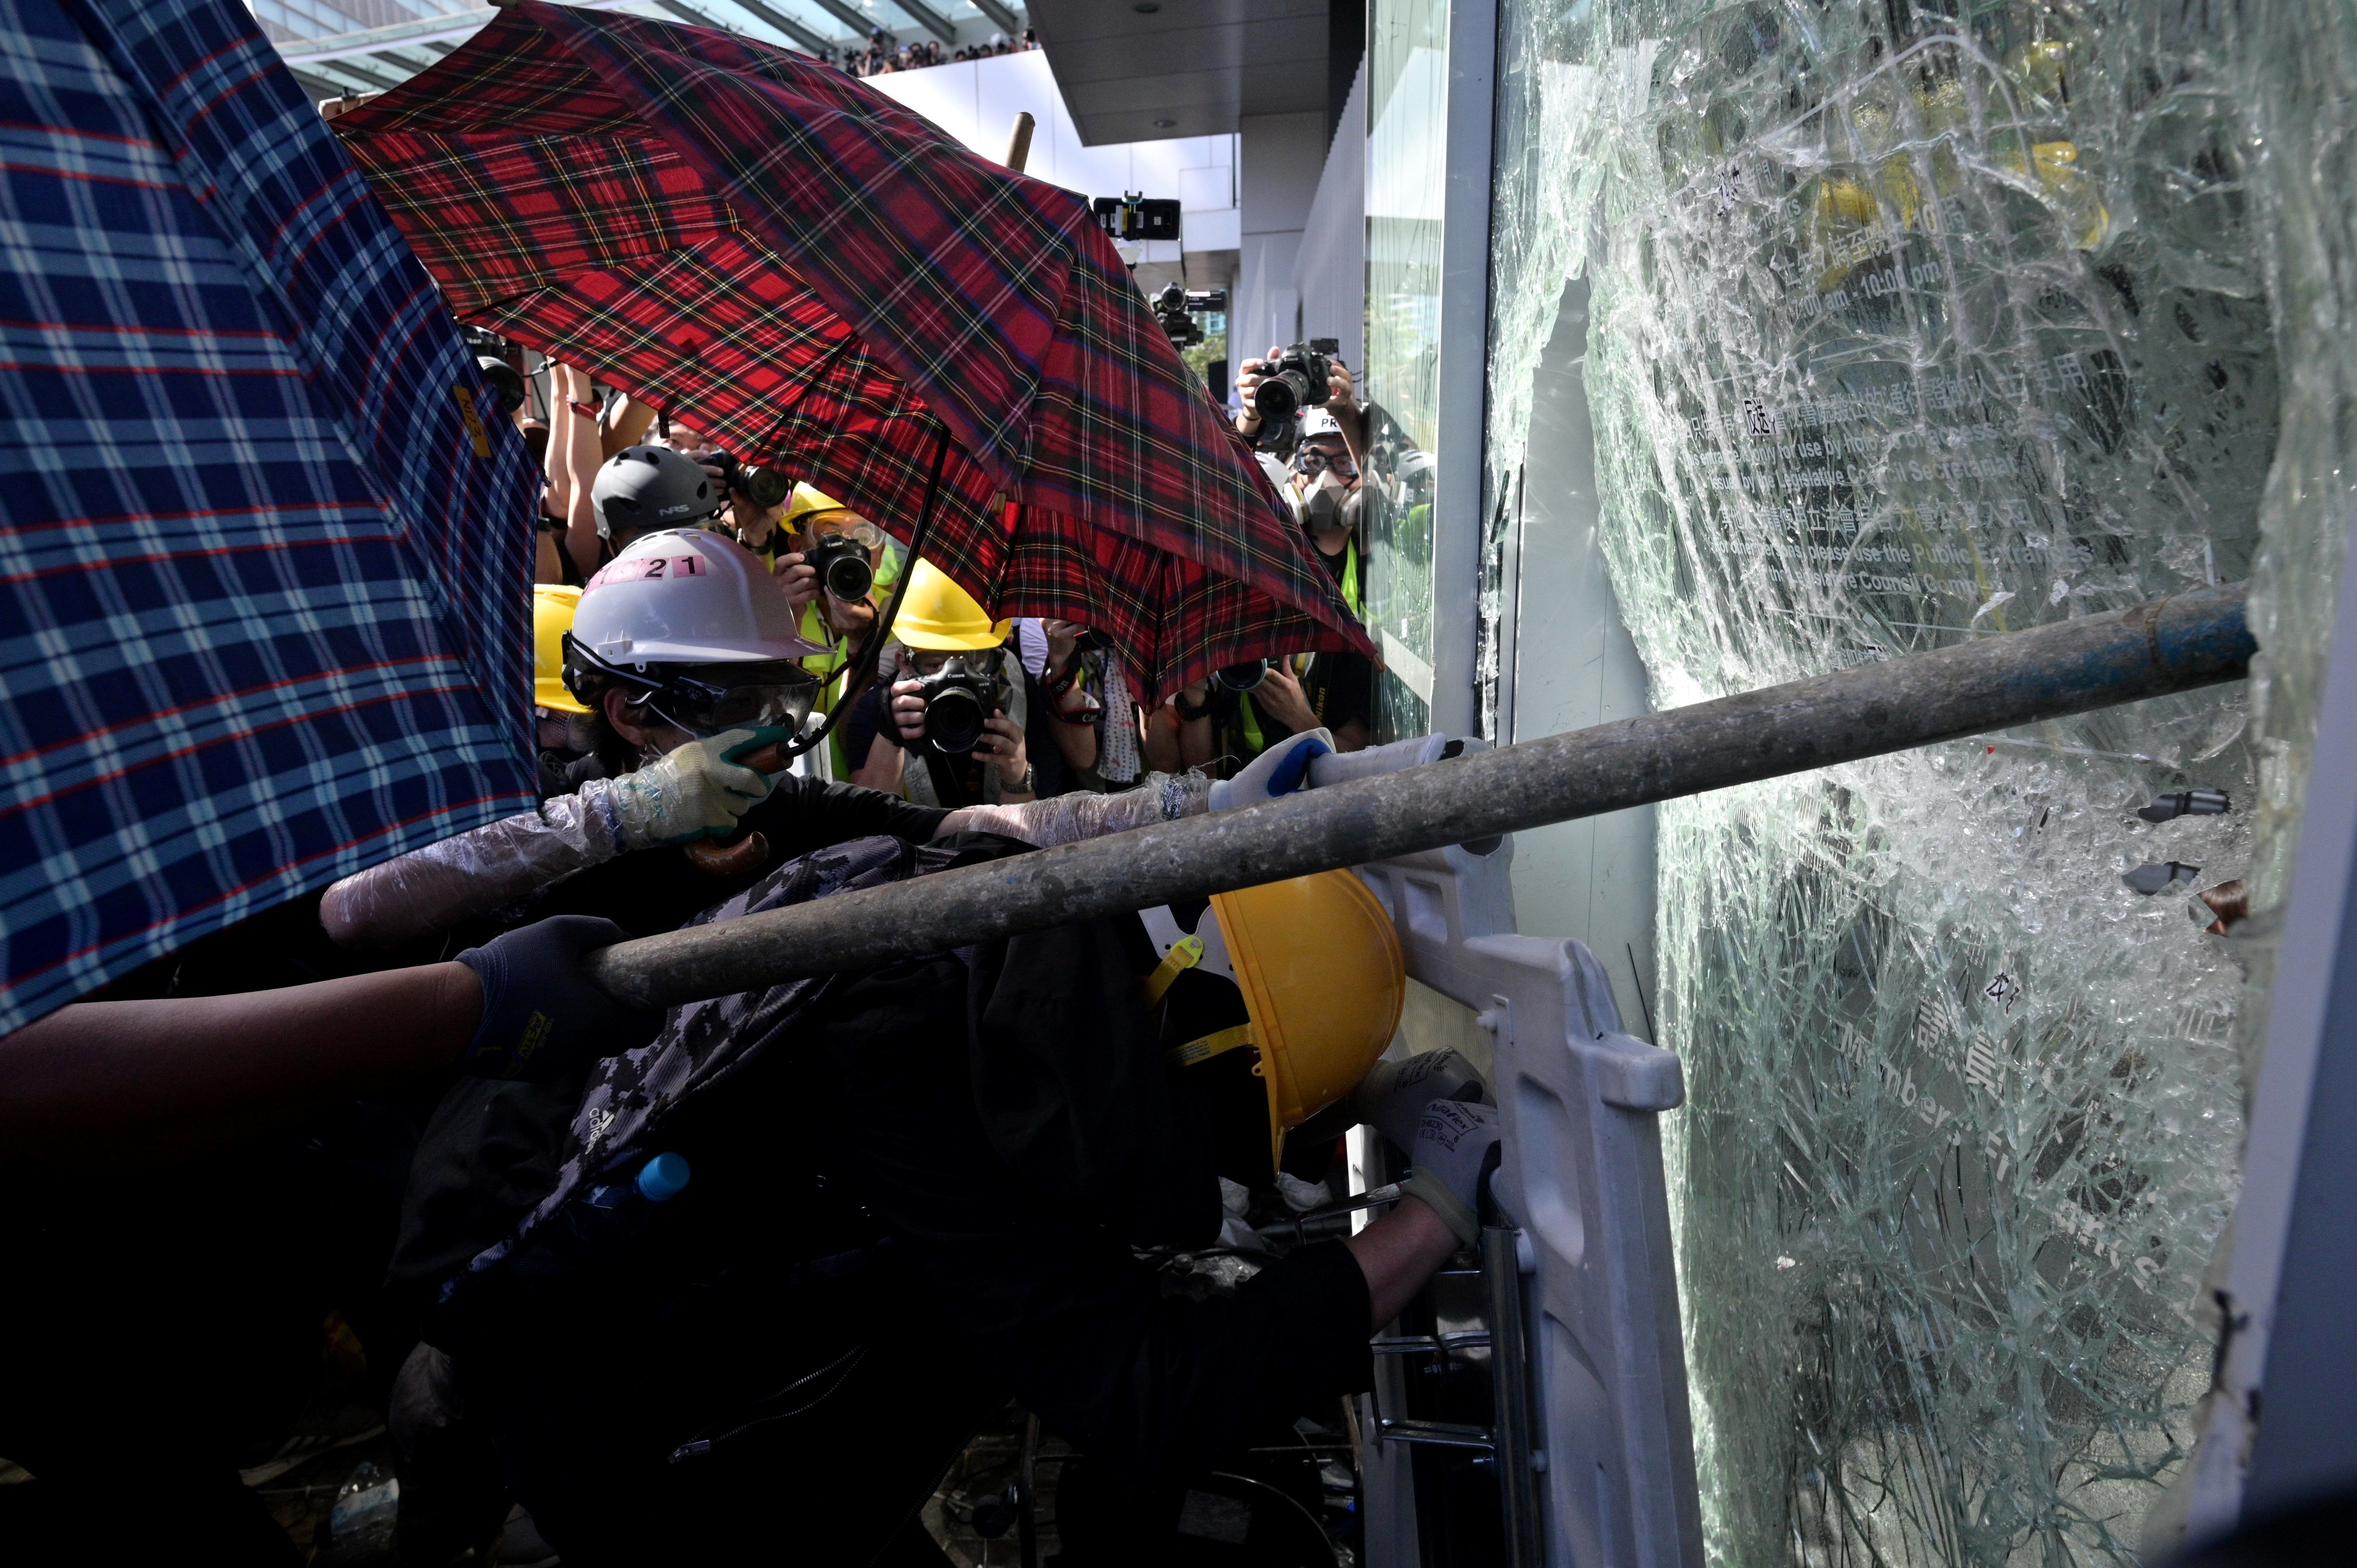 Protesters attempt to break a window at the government headquarters in Hong Kong.